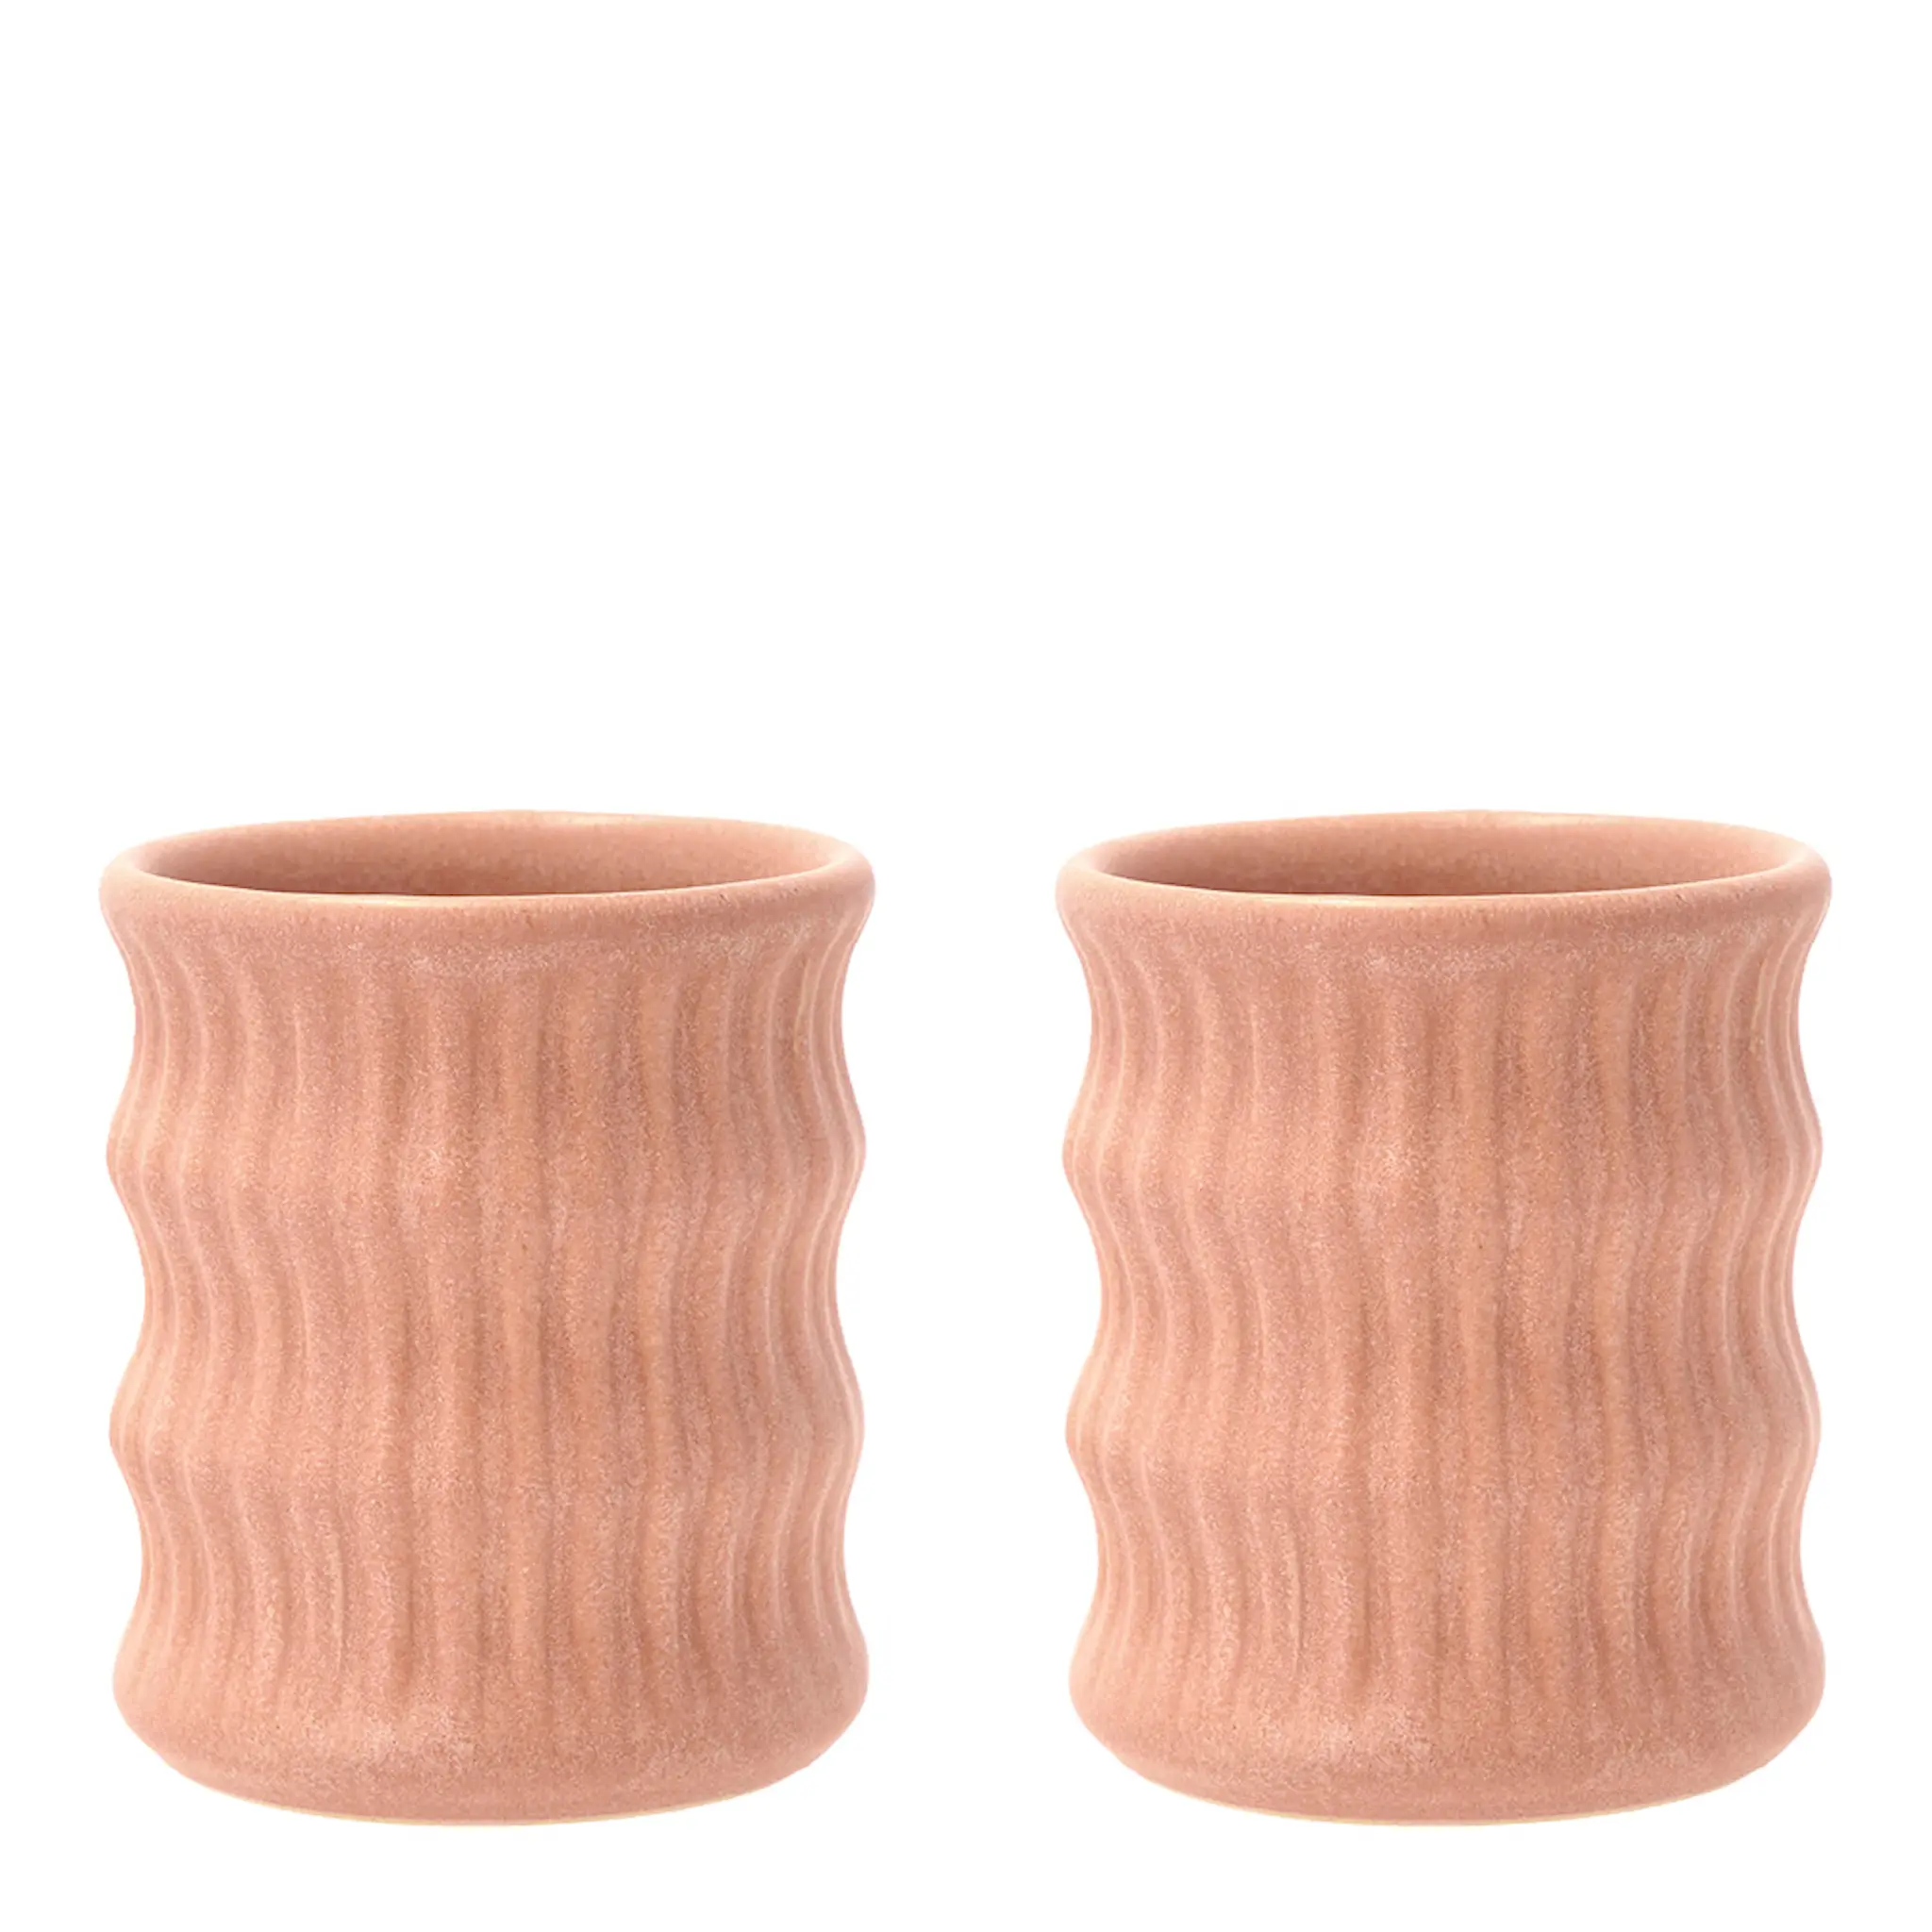 Villa Collection Styles Mugg räfflat mönster 2-pack 30 cl Rosa